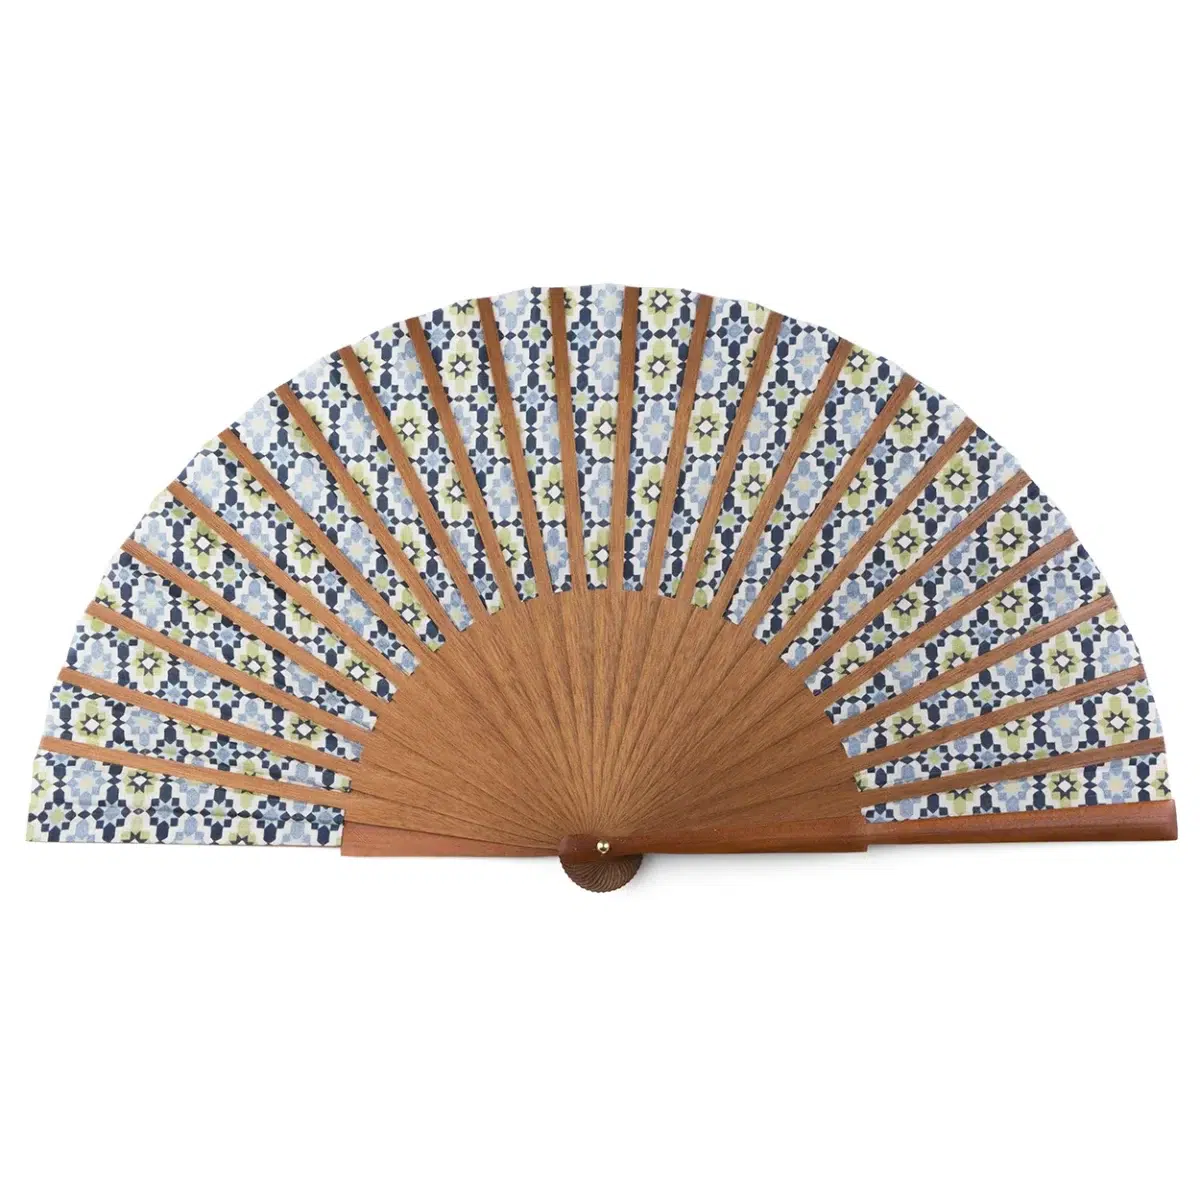 Silk and wood fan, back side inspired by Morocco.